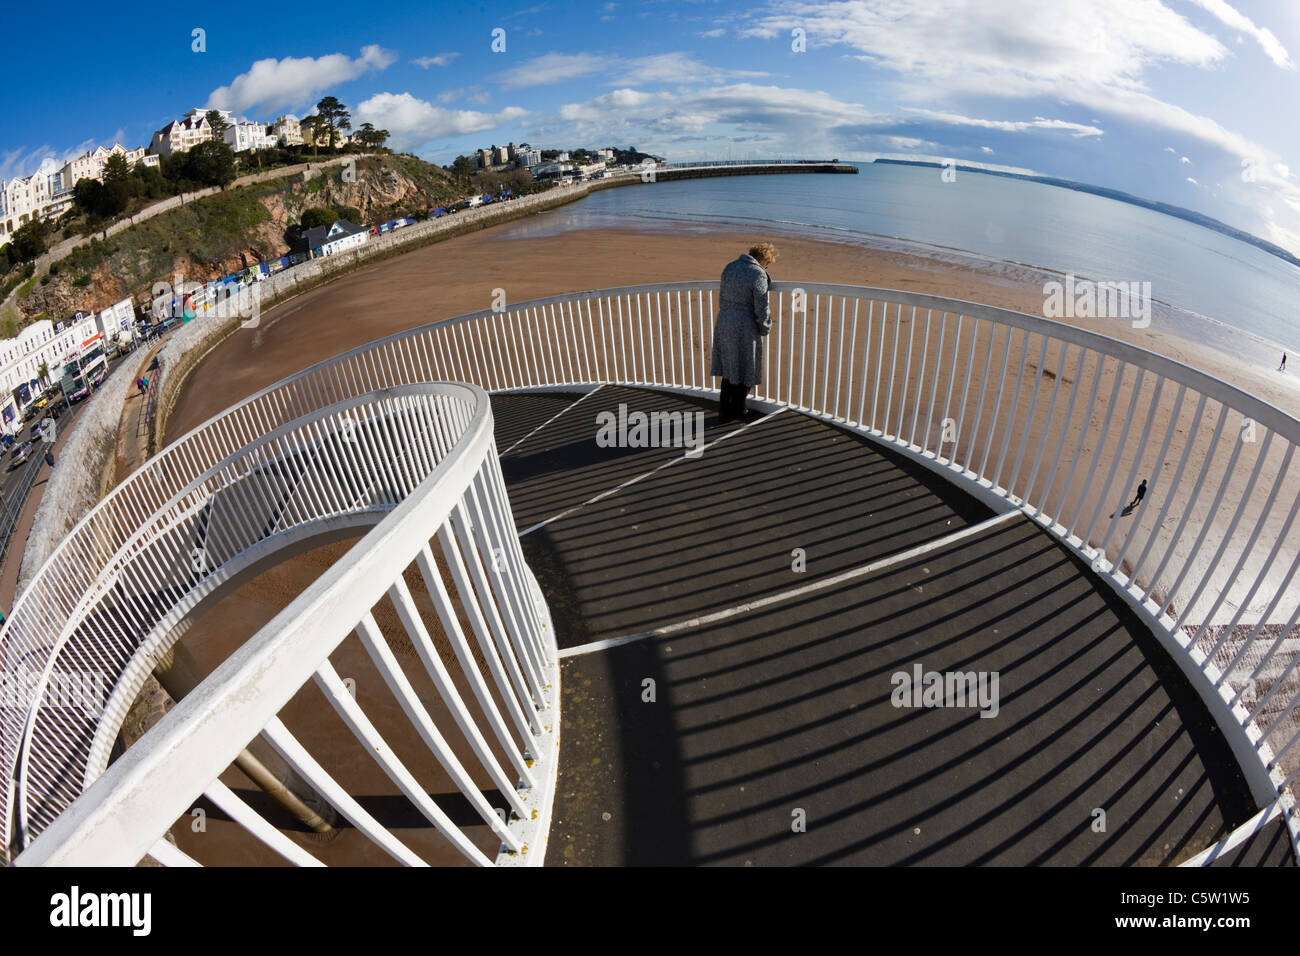 Metal bridge and railings with spiral staircase leading down to the beach in Torquay, Devon Stock Photo